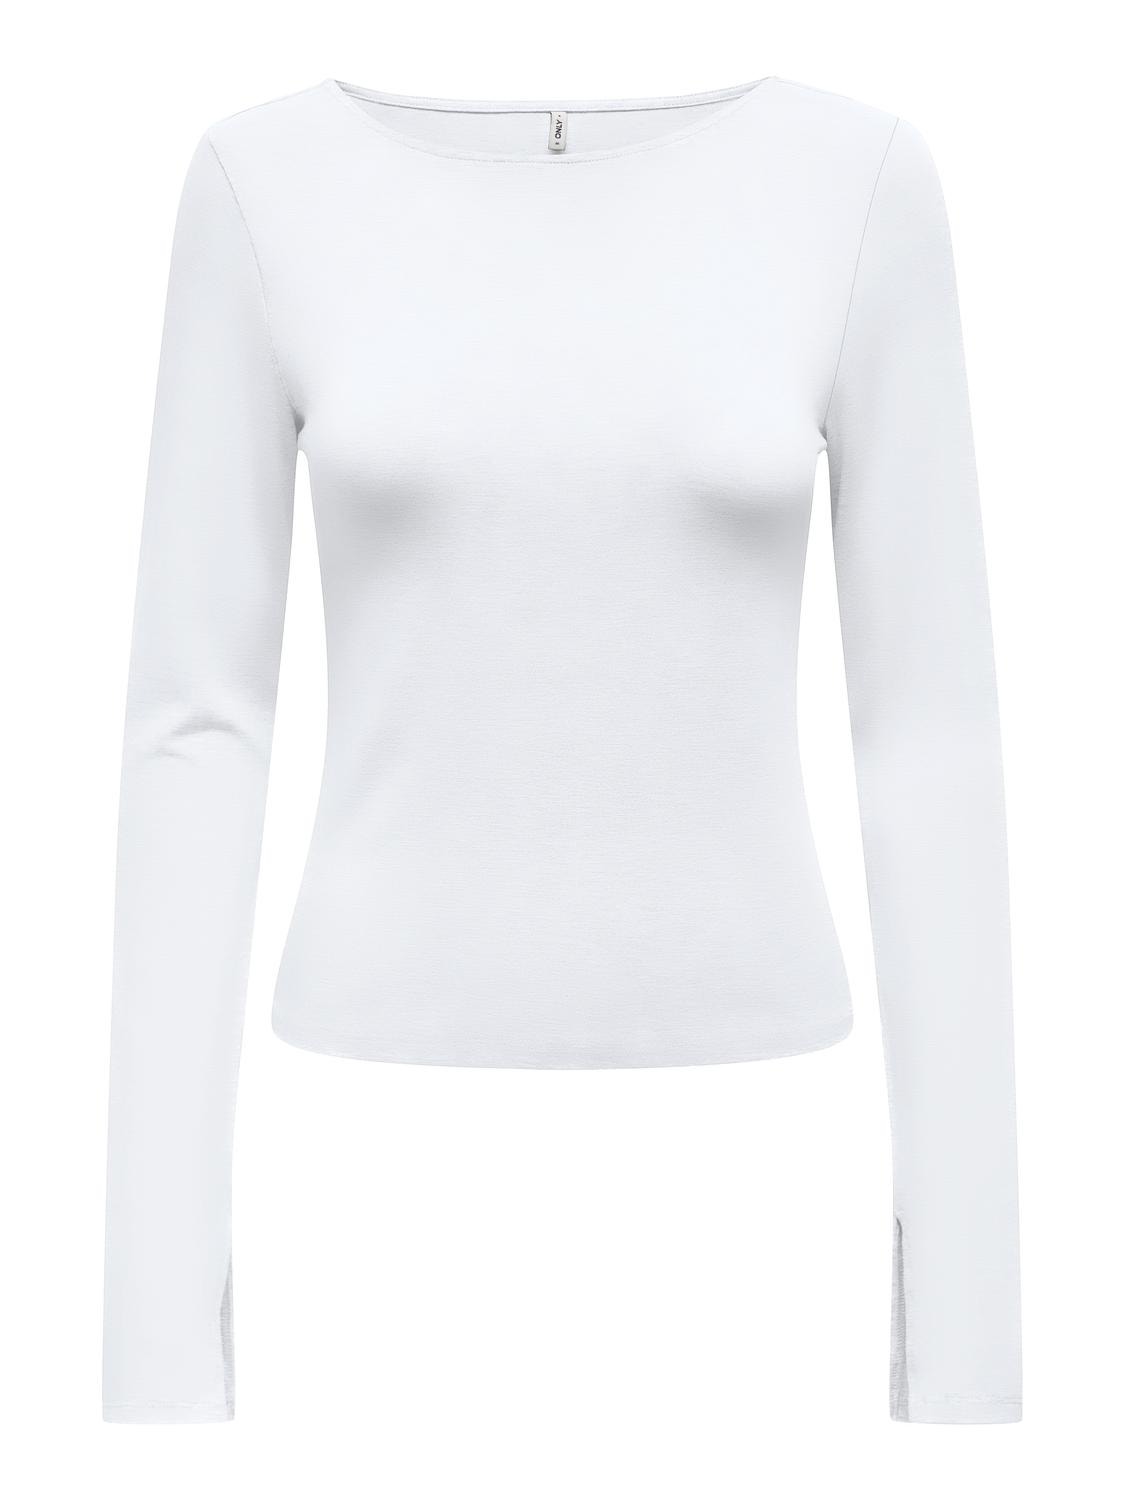 ONLY Regular fit Boothals Top -White - 15336321